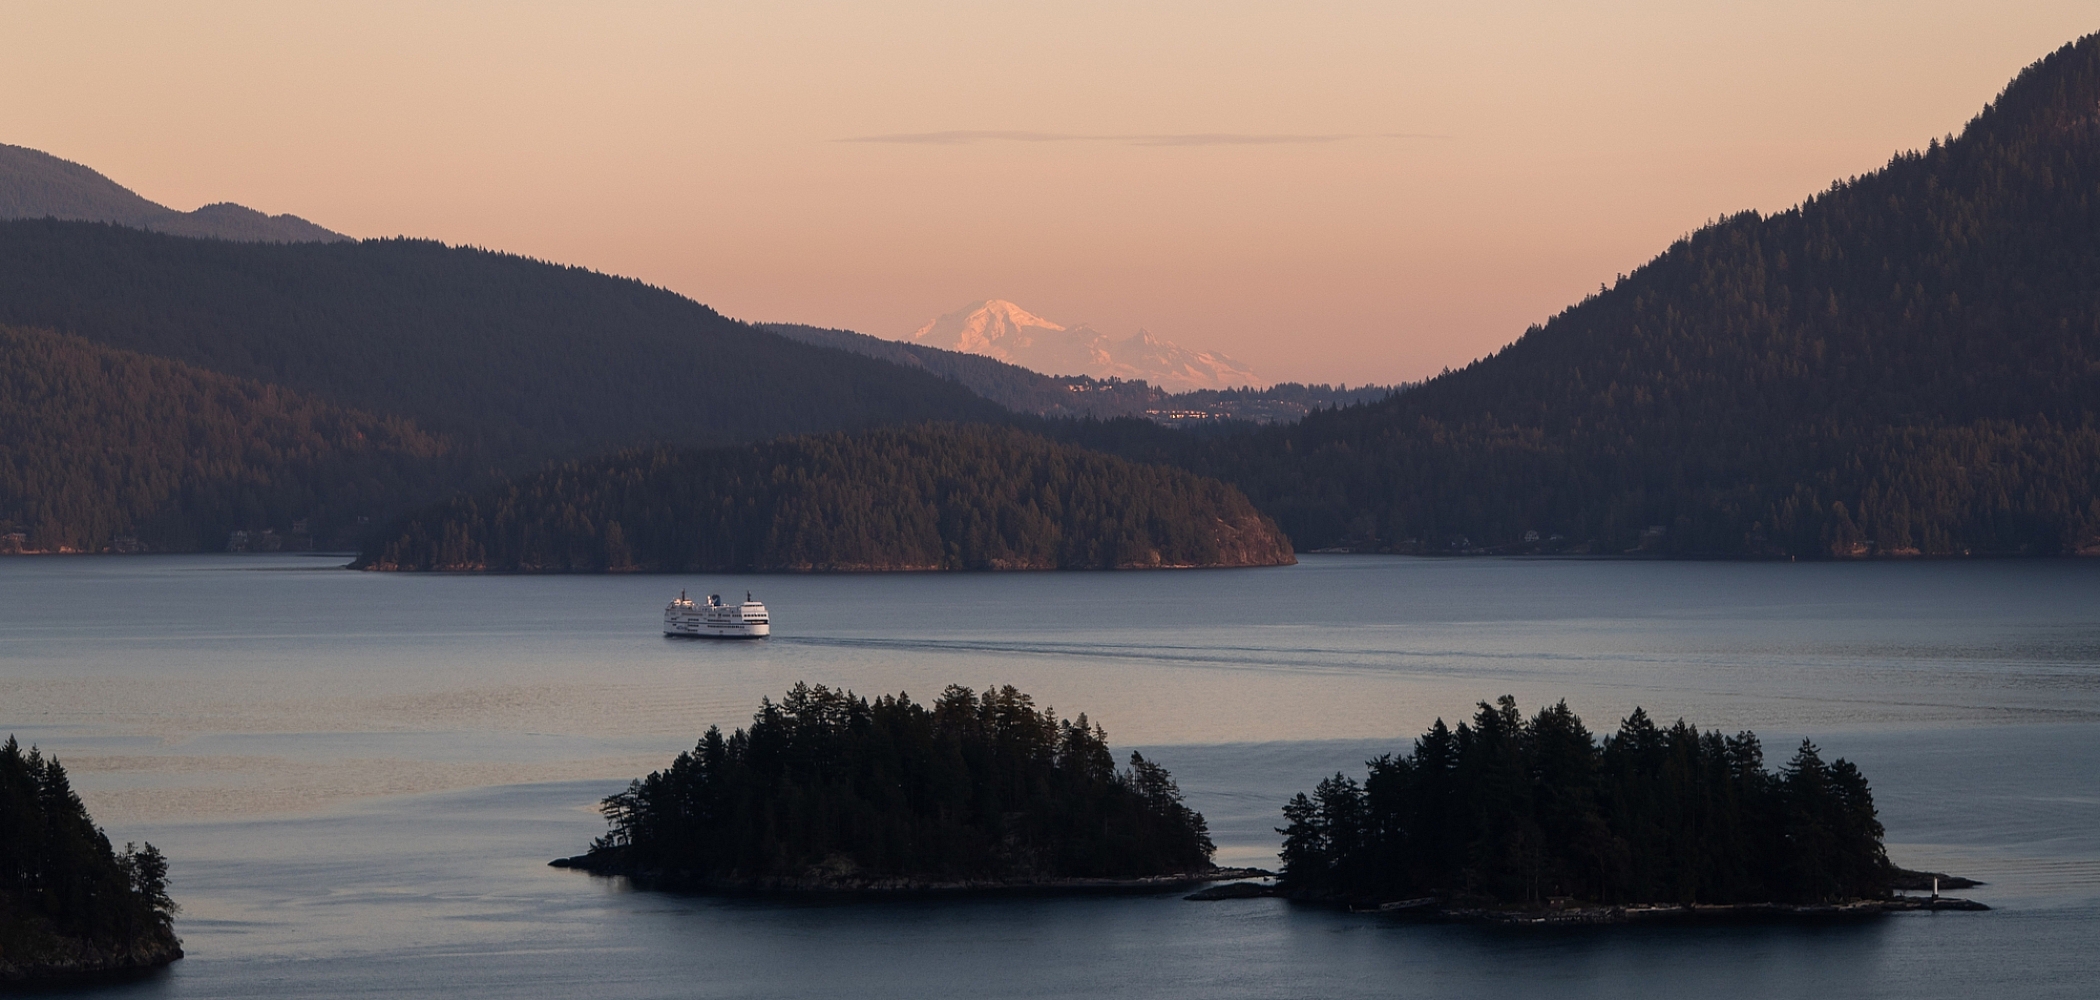 Aerial view of a BC Ferry sailing past two small islands at sunset